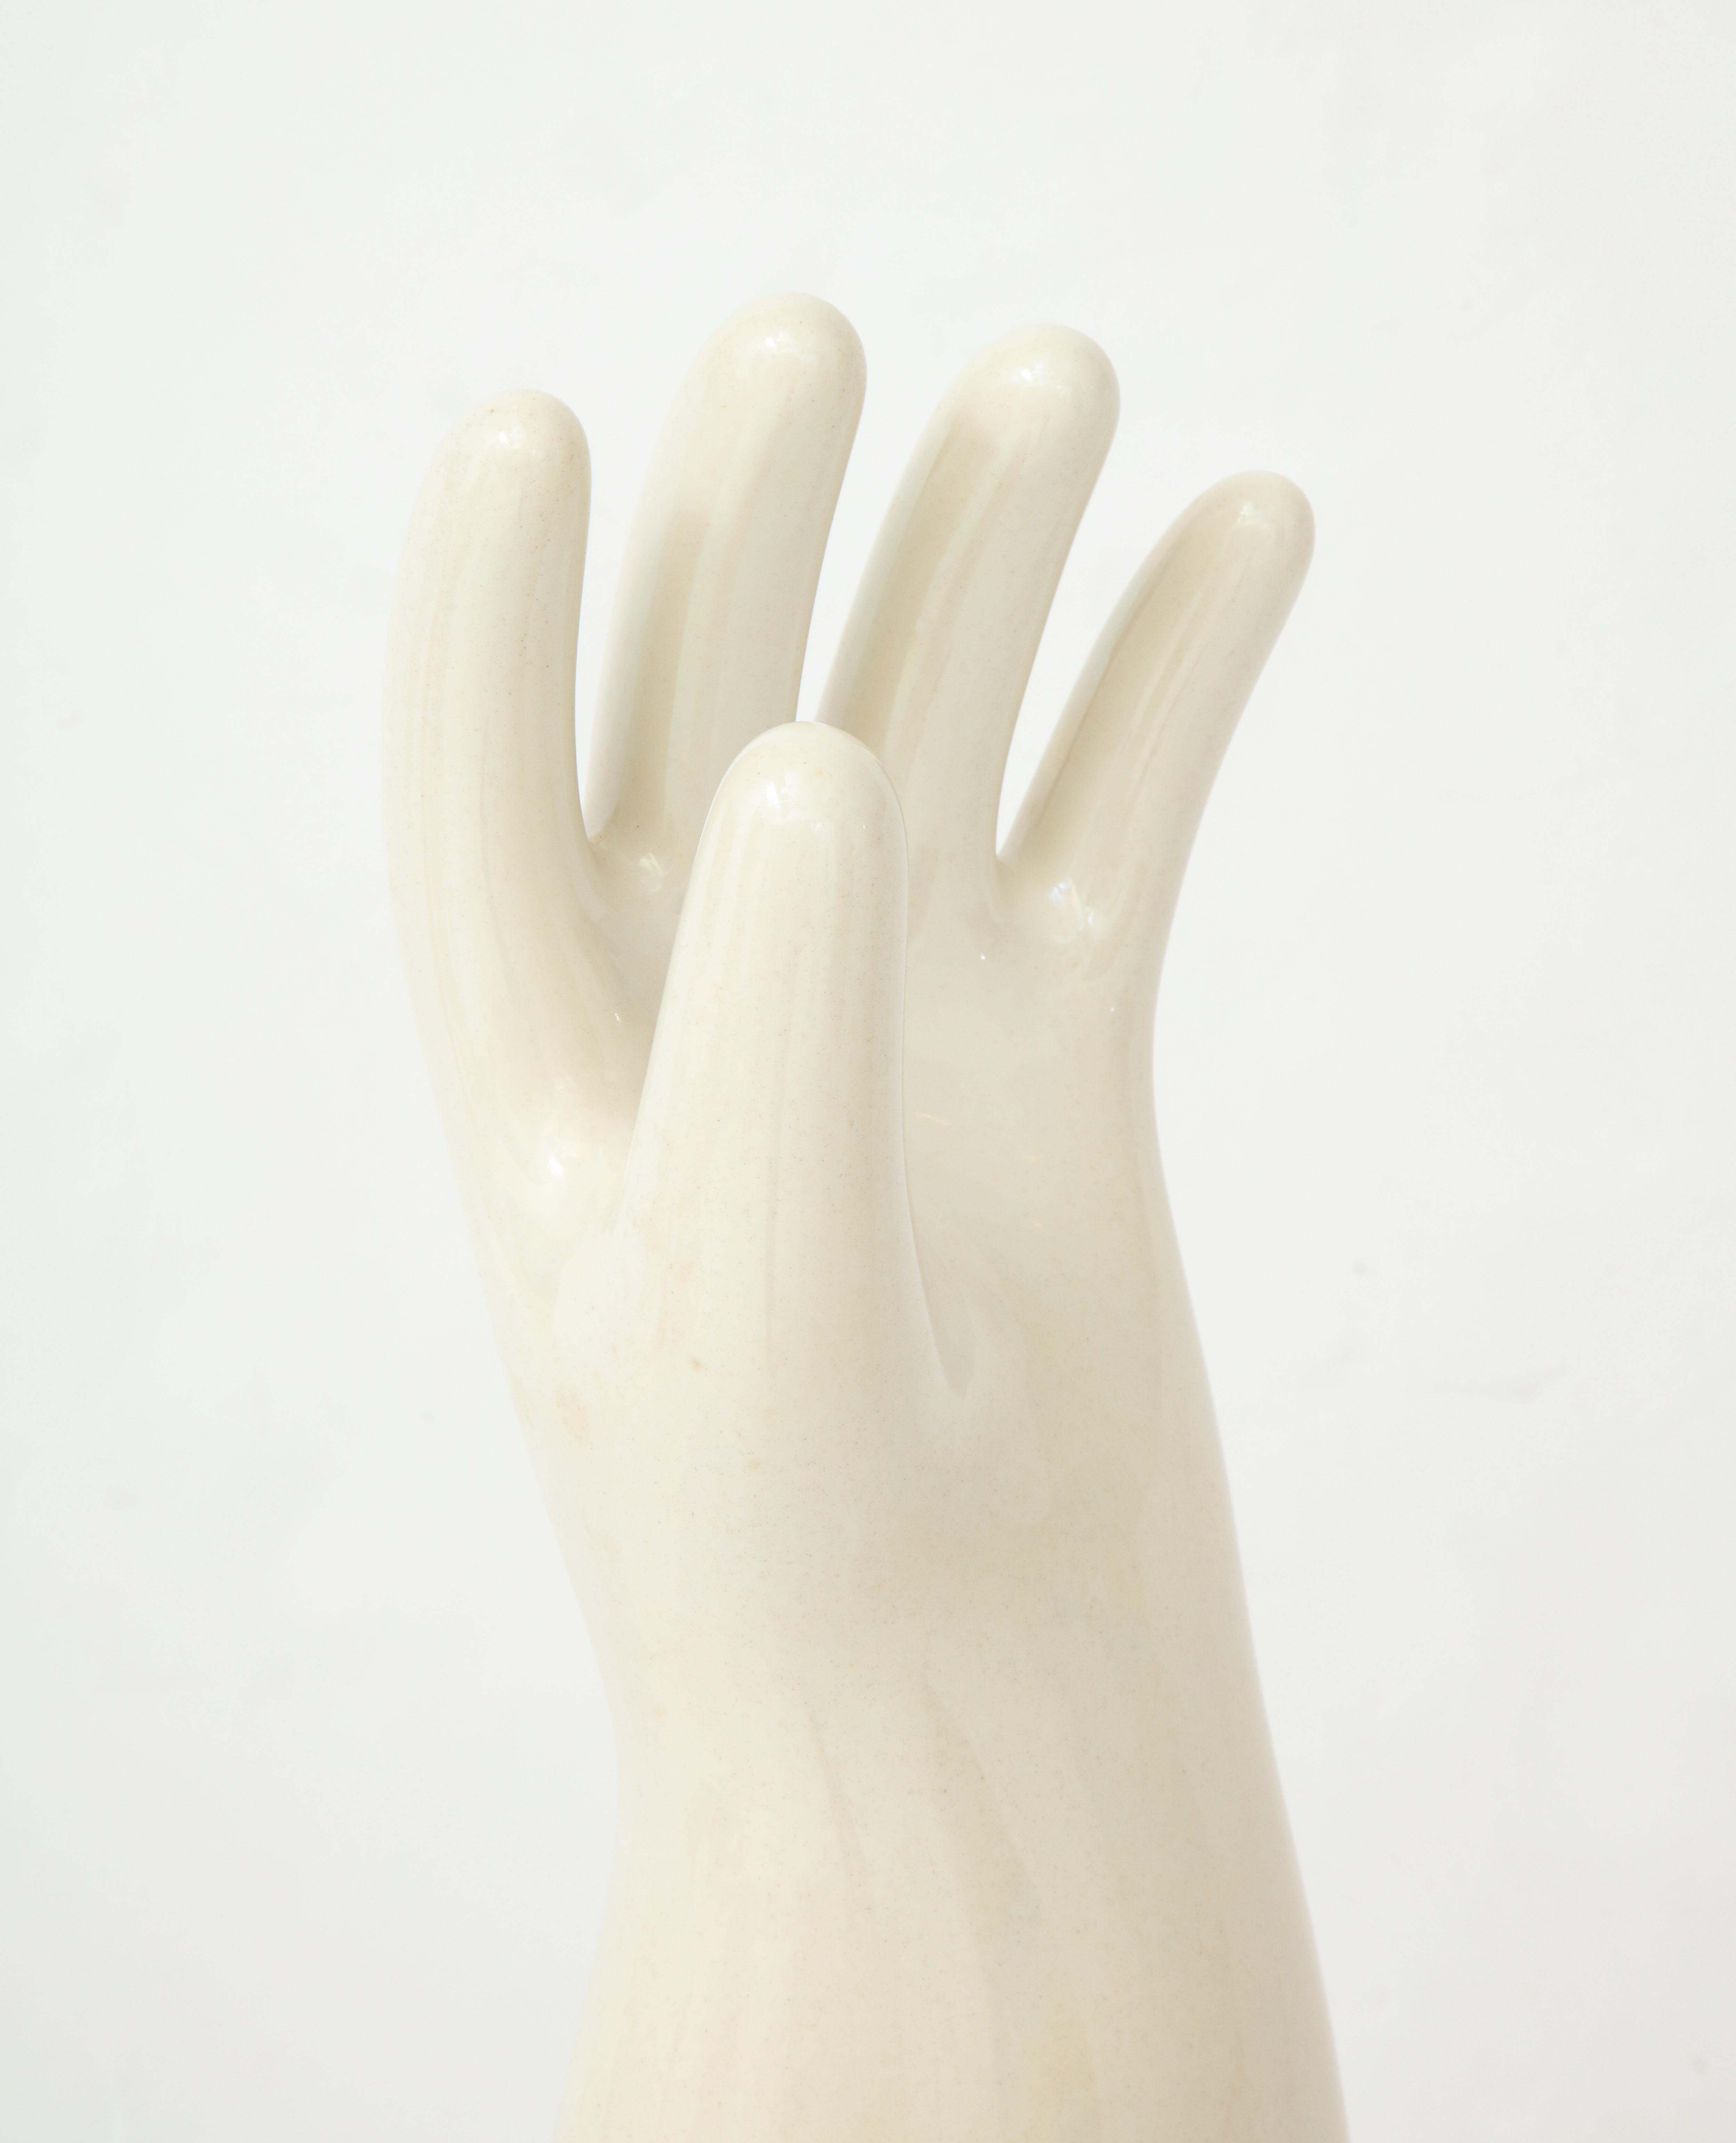 American Porcelain Hand Glove Mold For Sale